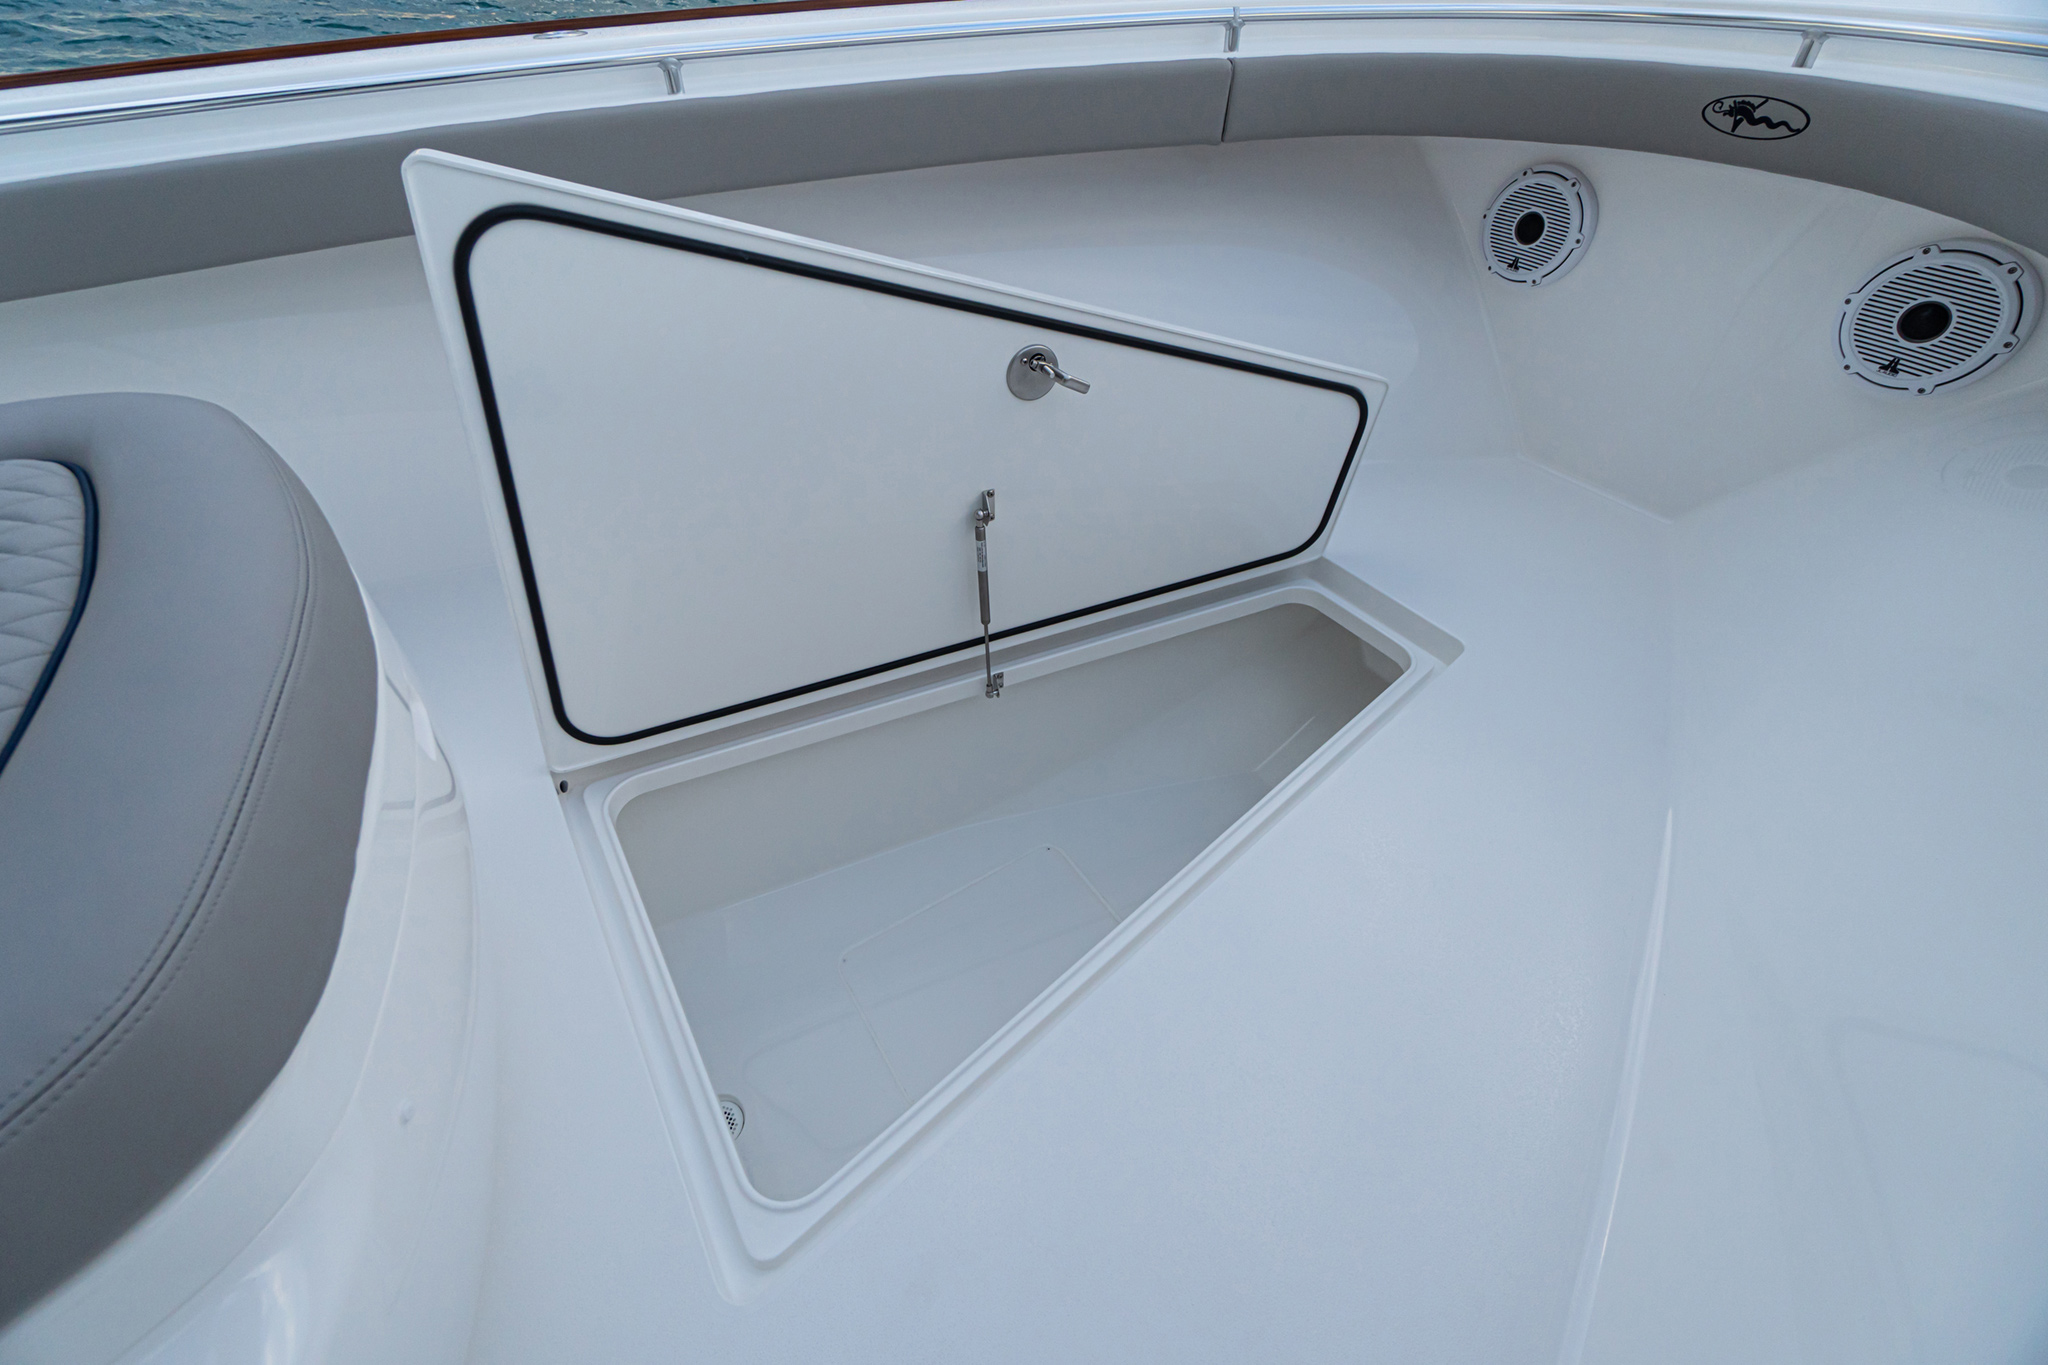 Insulated forward in-deck fish box drains overboard; access to available bow thruster.